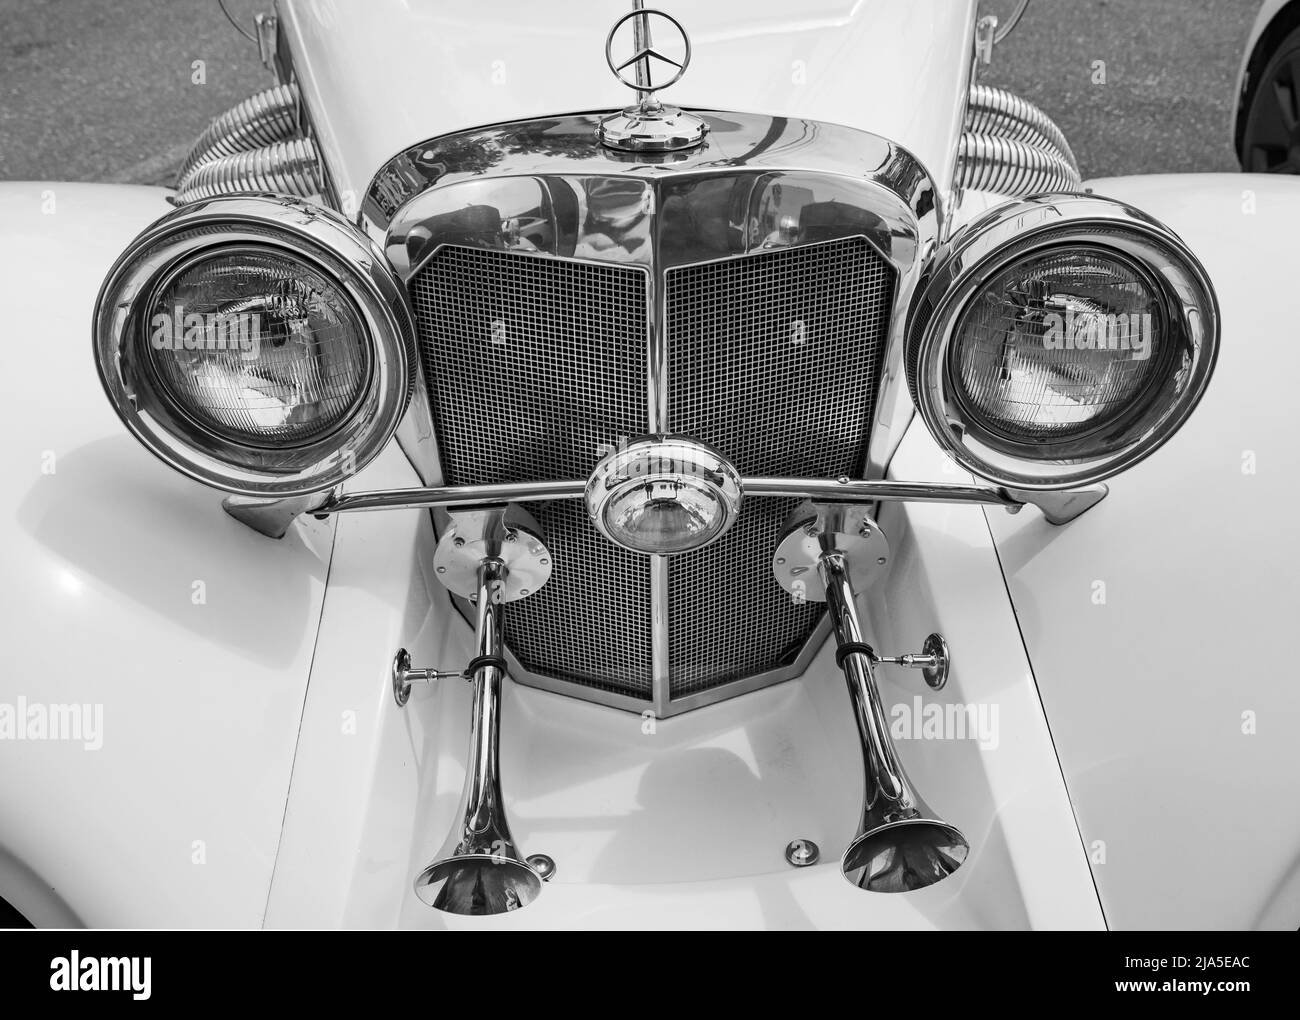 Mid-size luxury car Mercedes-Benz front, close-up details, black and white, The oldtimer show. Vintage Mercedes Benz car parked in the street. Travel Stock Photo